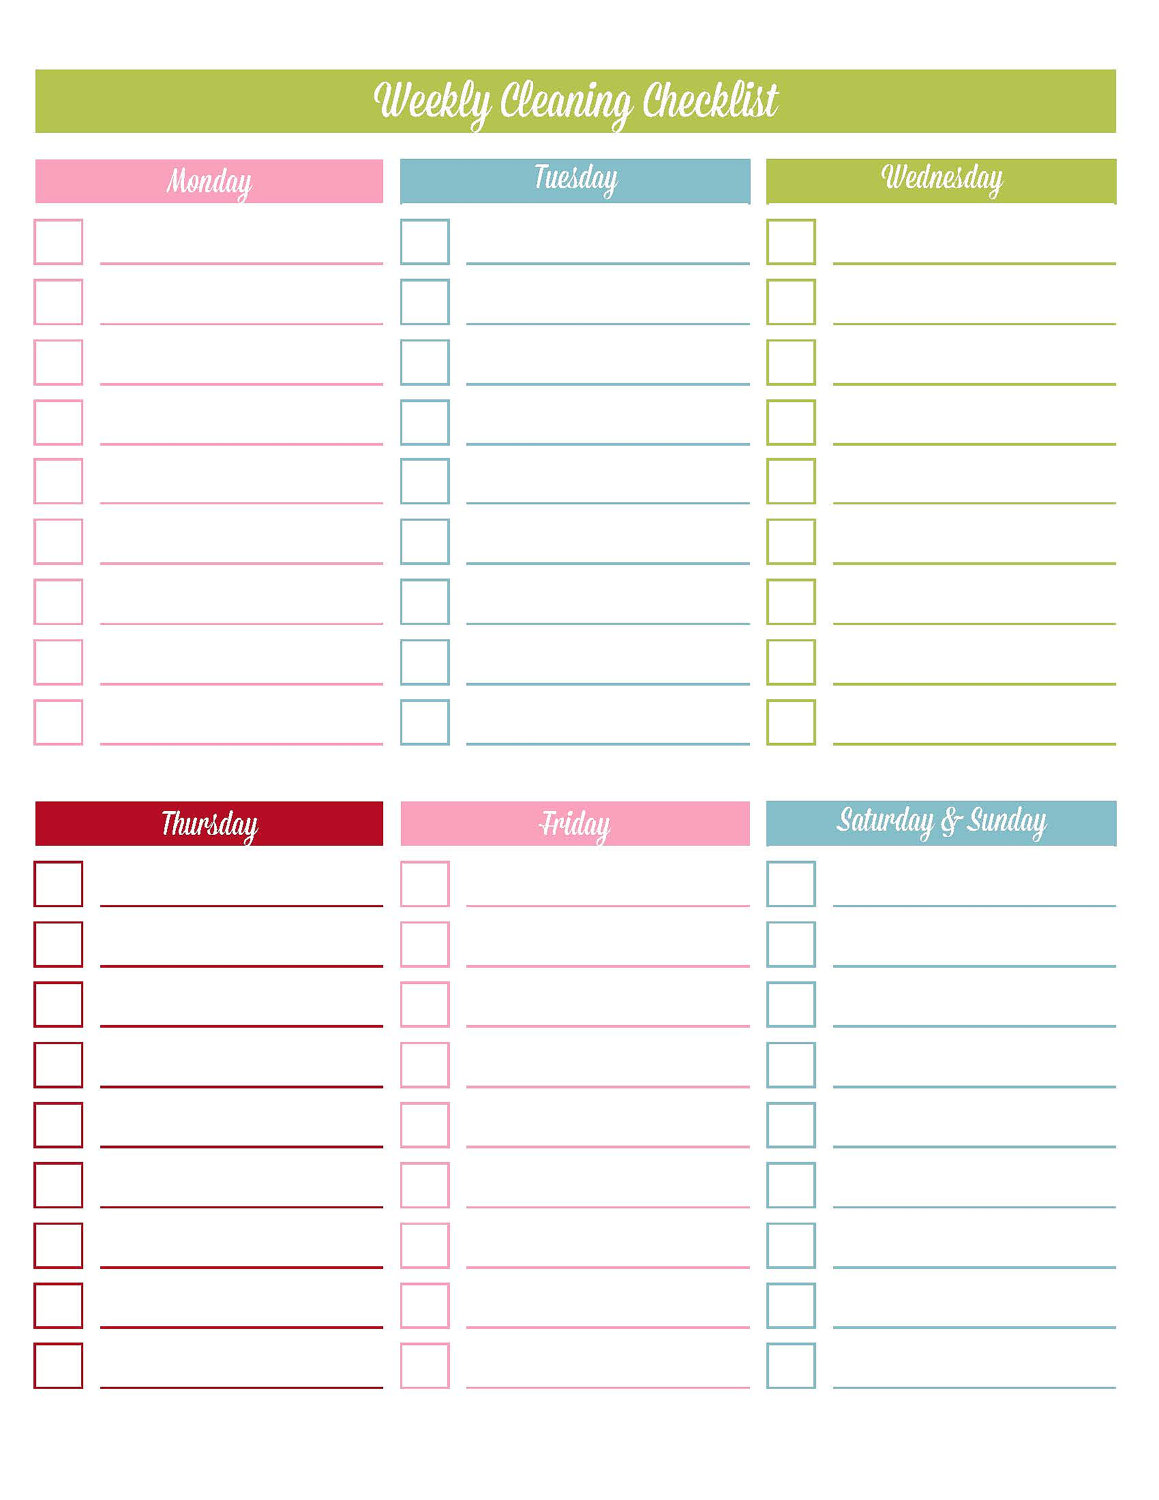 6 Best Images of To Do List Printable Editable Template Editable to